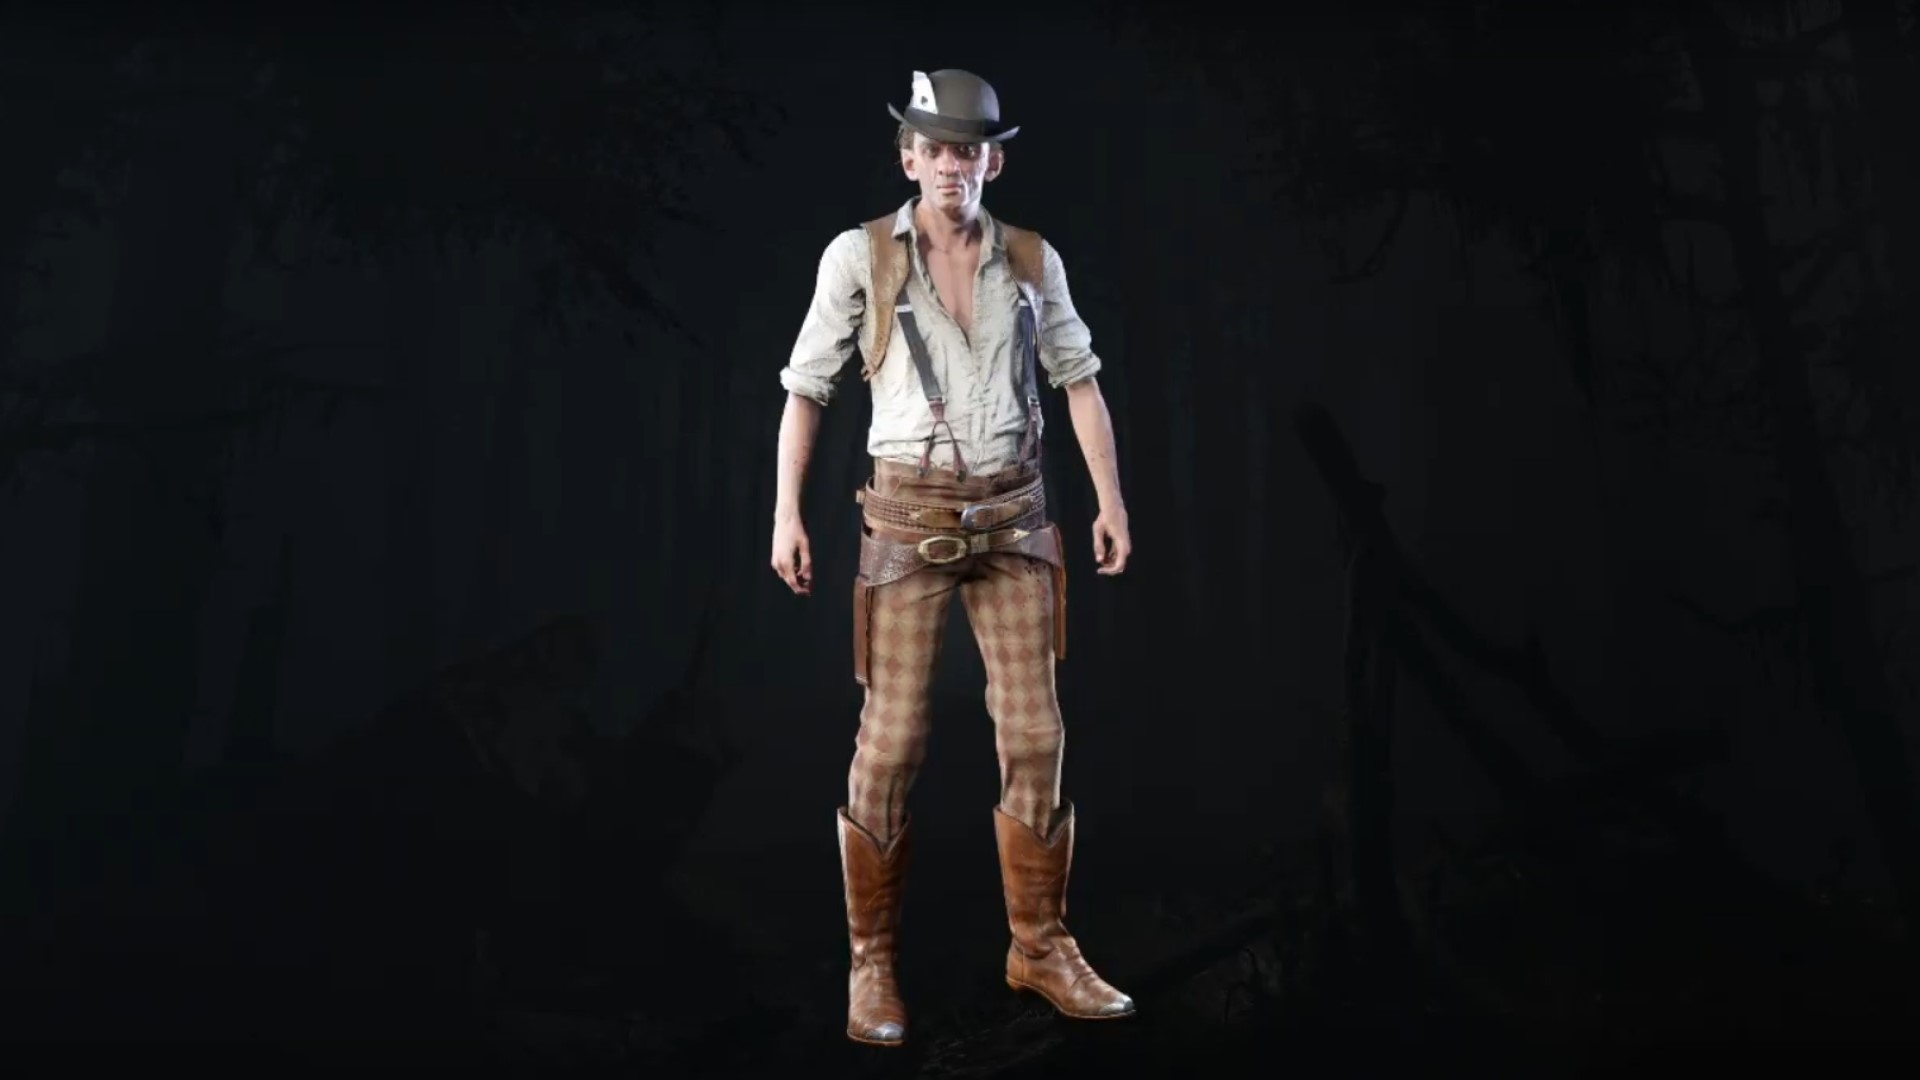 Hunt: Showdown’s next update adds new daily rewards and weapon variants